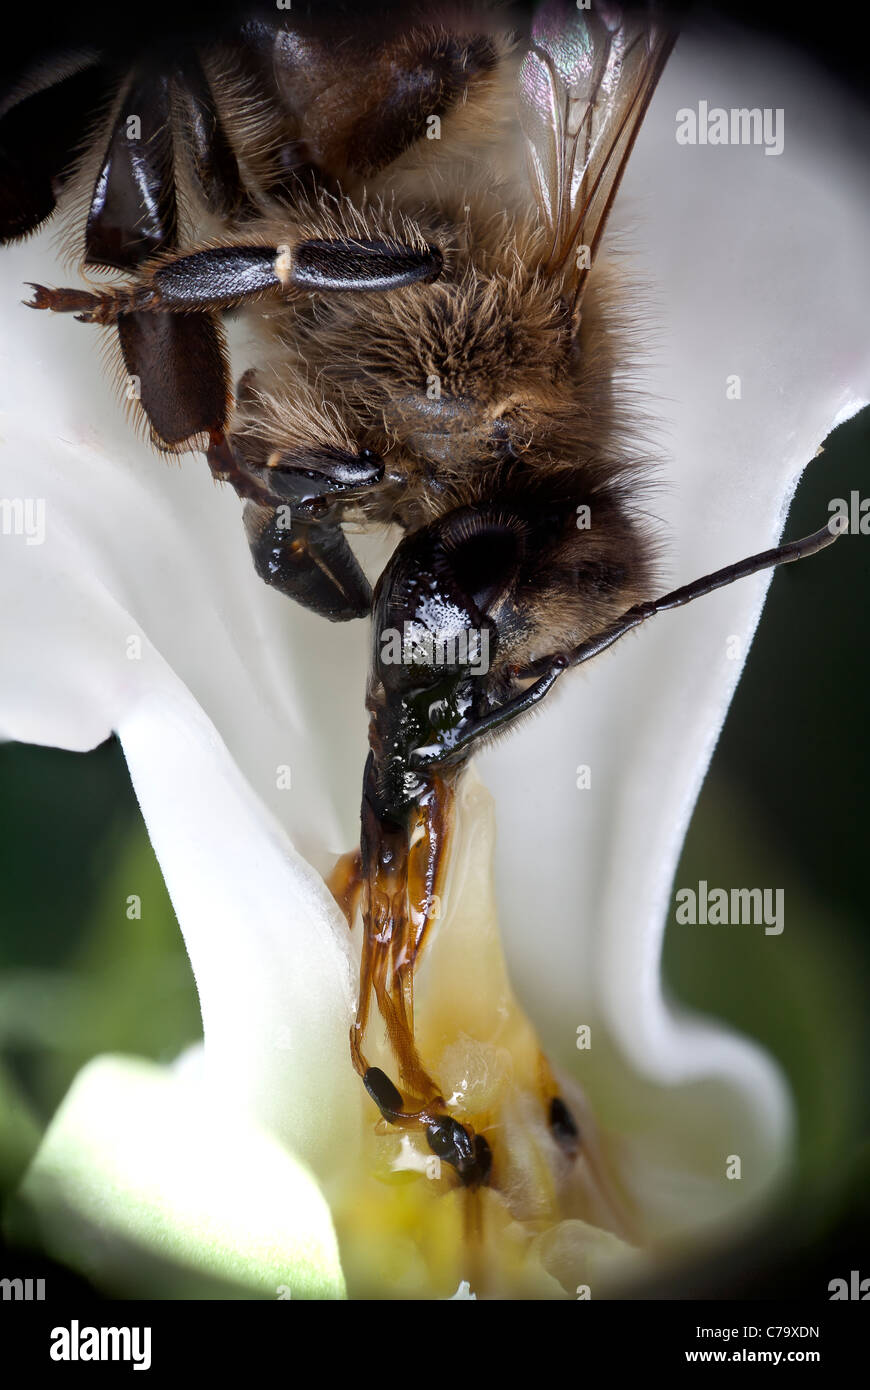 A bee (Apis mellifera) dead from exhaustion after being trapped by a Cruel Vine flower (Araujia sericifera). Stock Photo